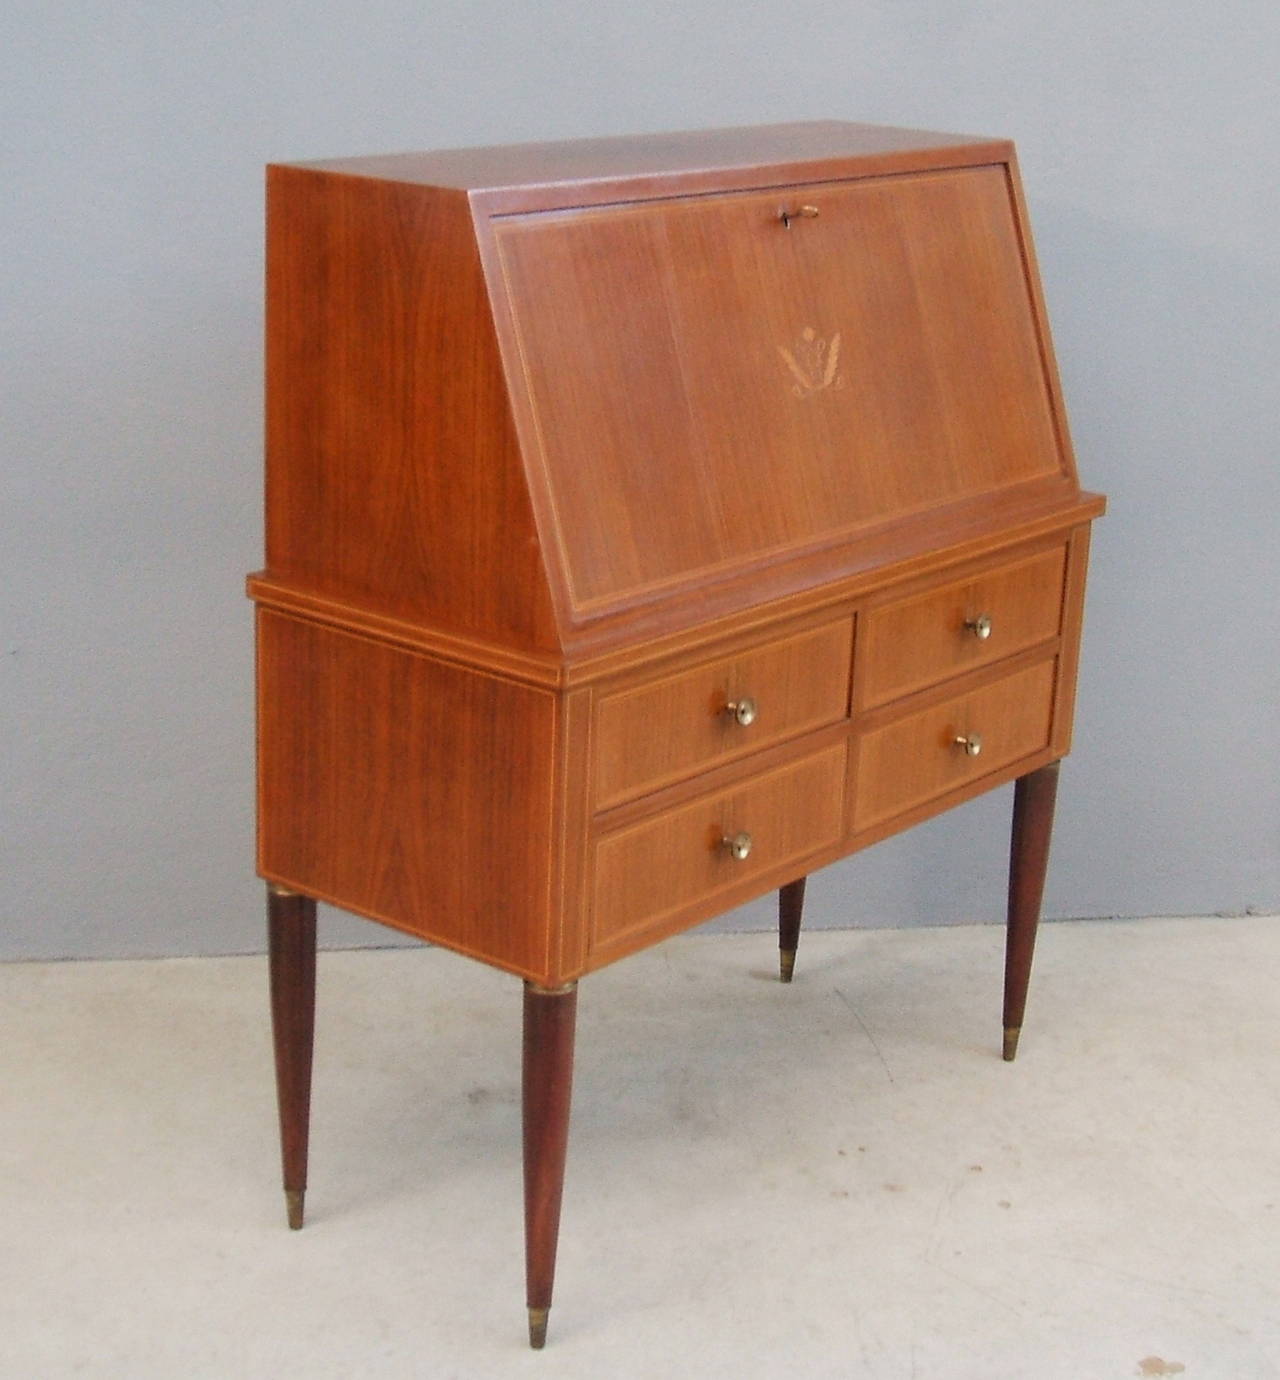 Elegant bureau with four drawers in the front and two inside. Inlaid on the front.